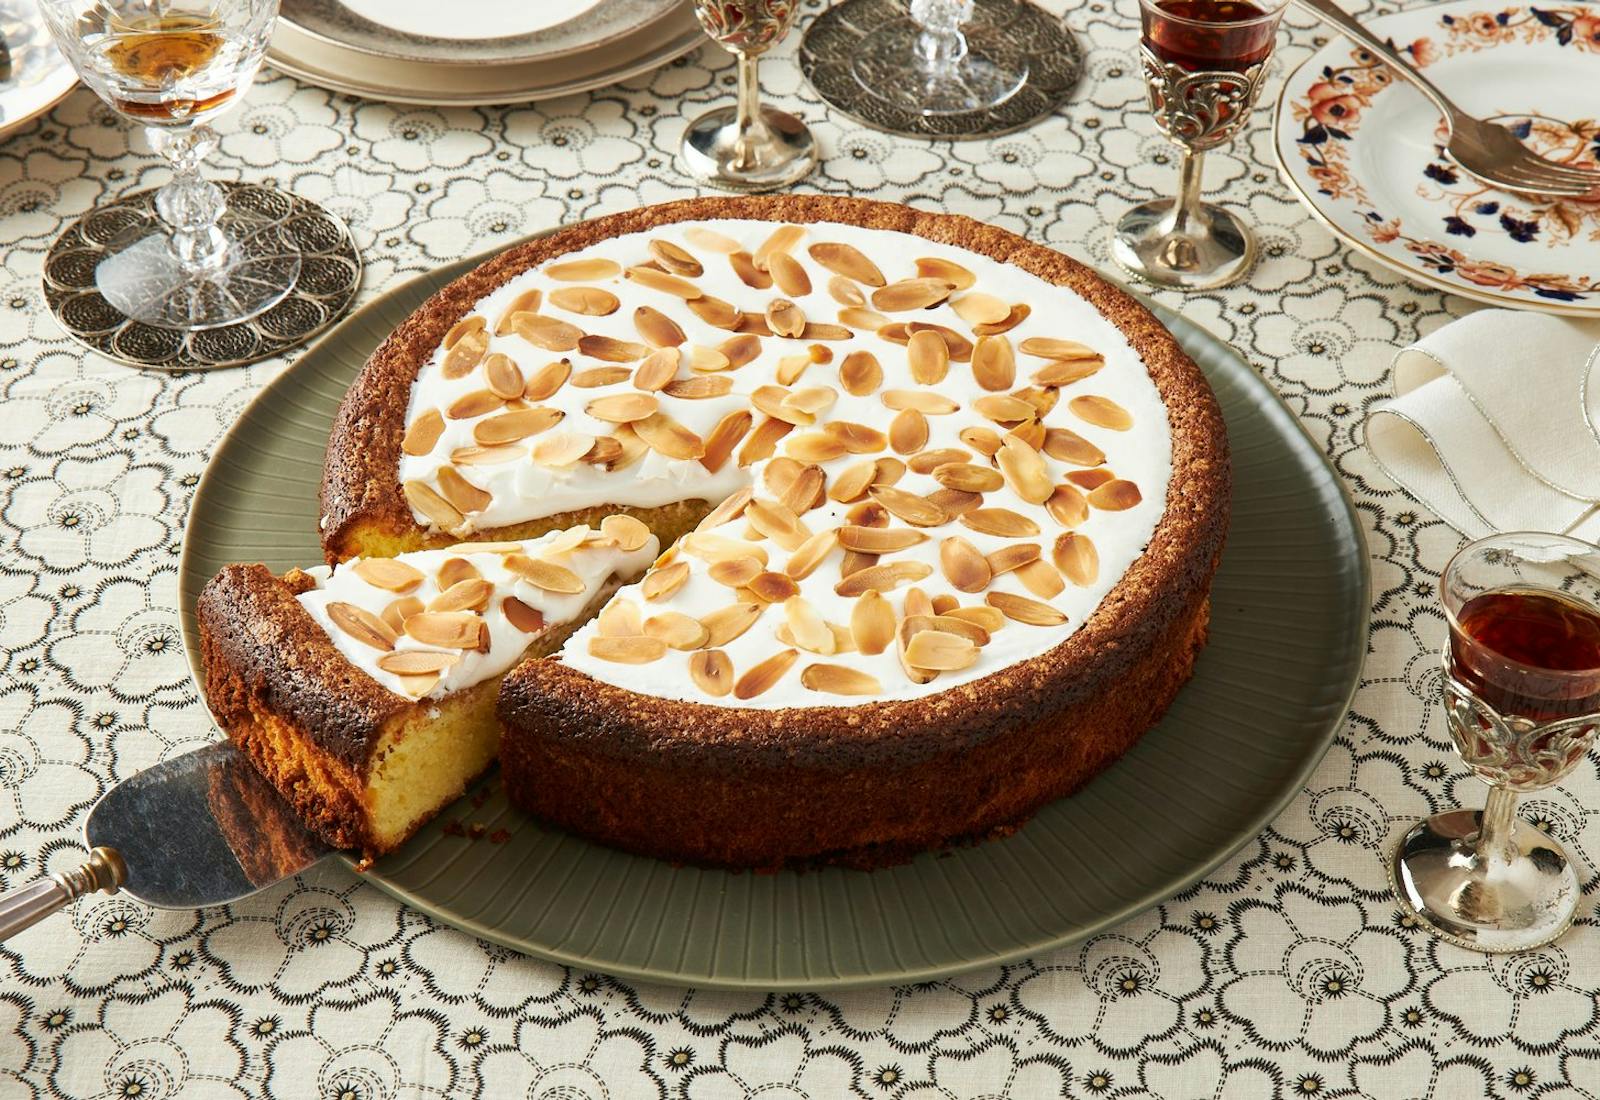 Almond cake with icing and toasted almonds, red wine and serving plates.